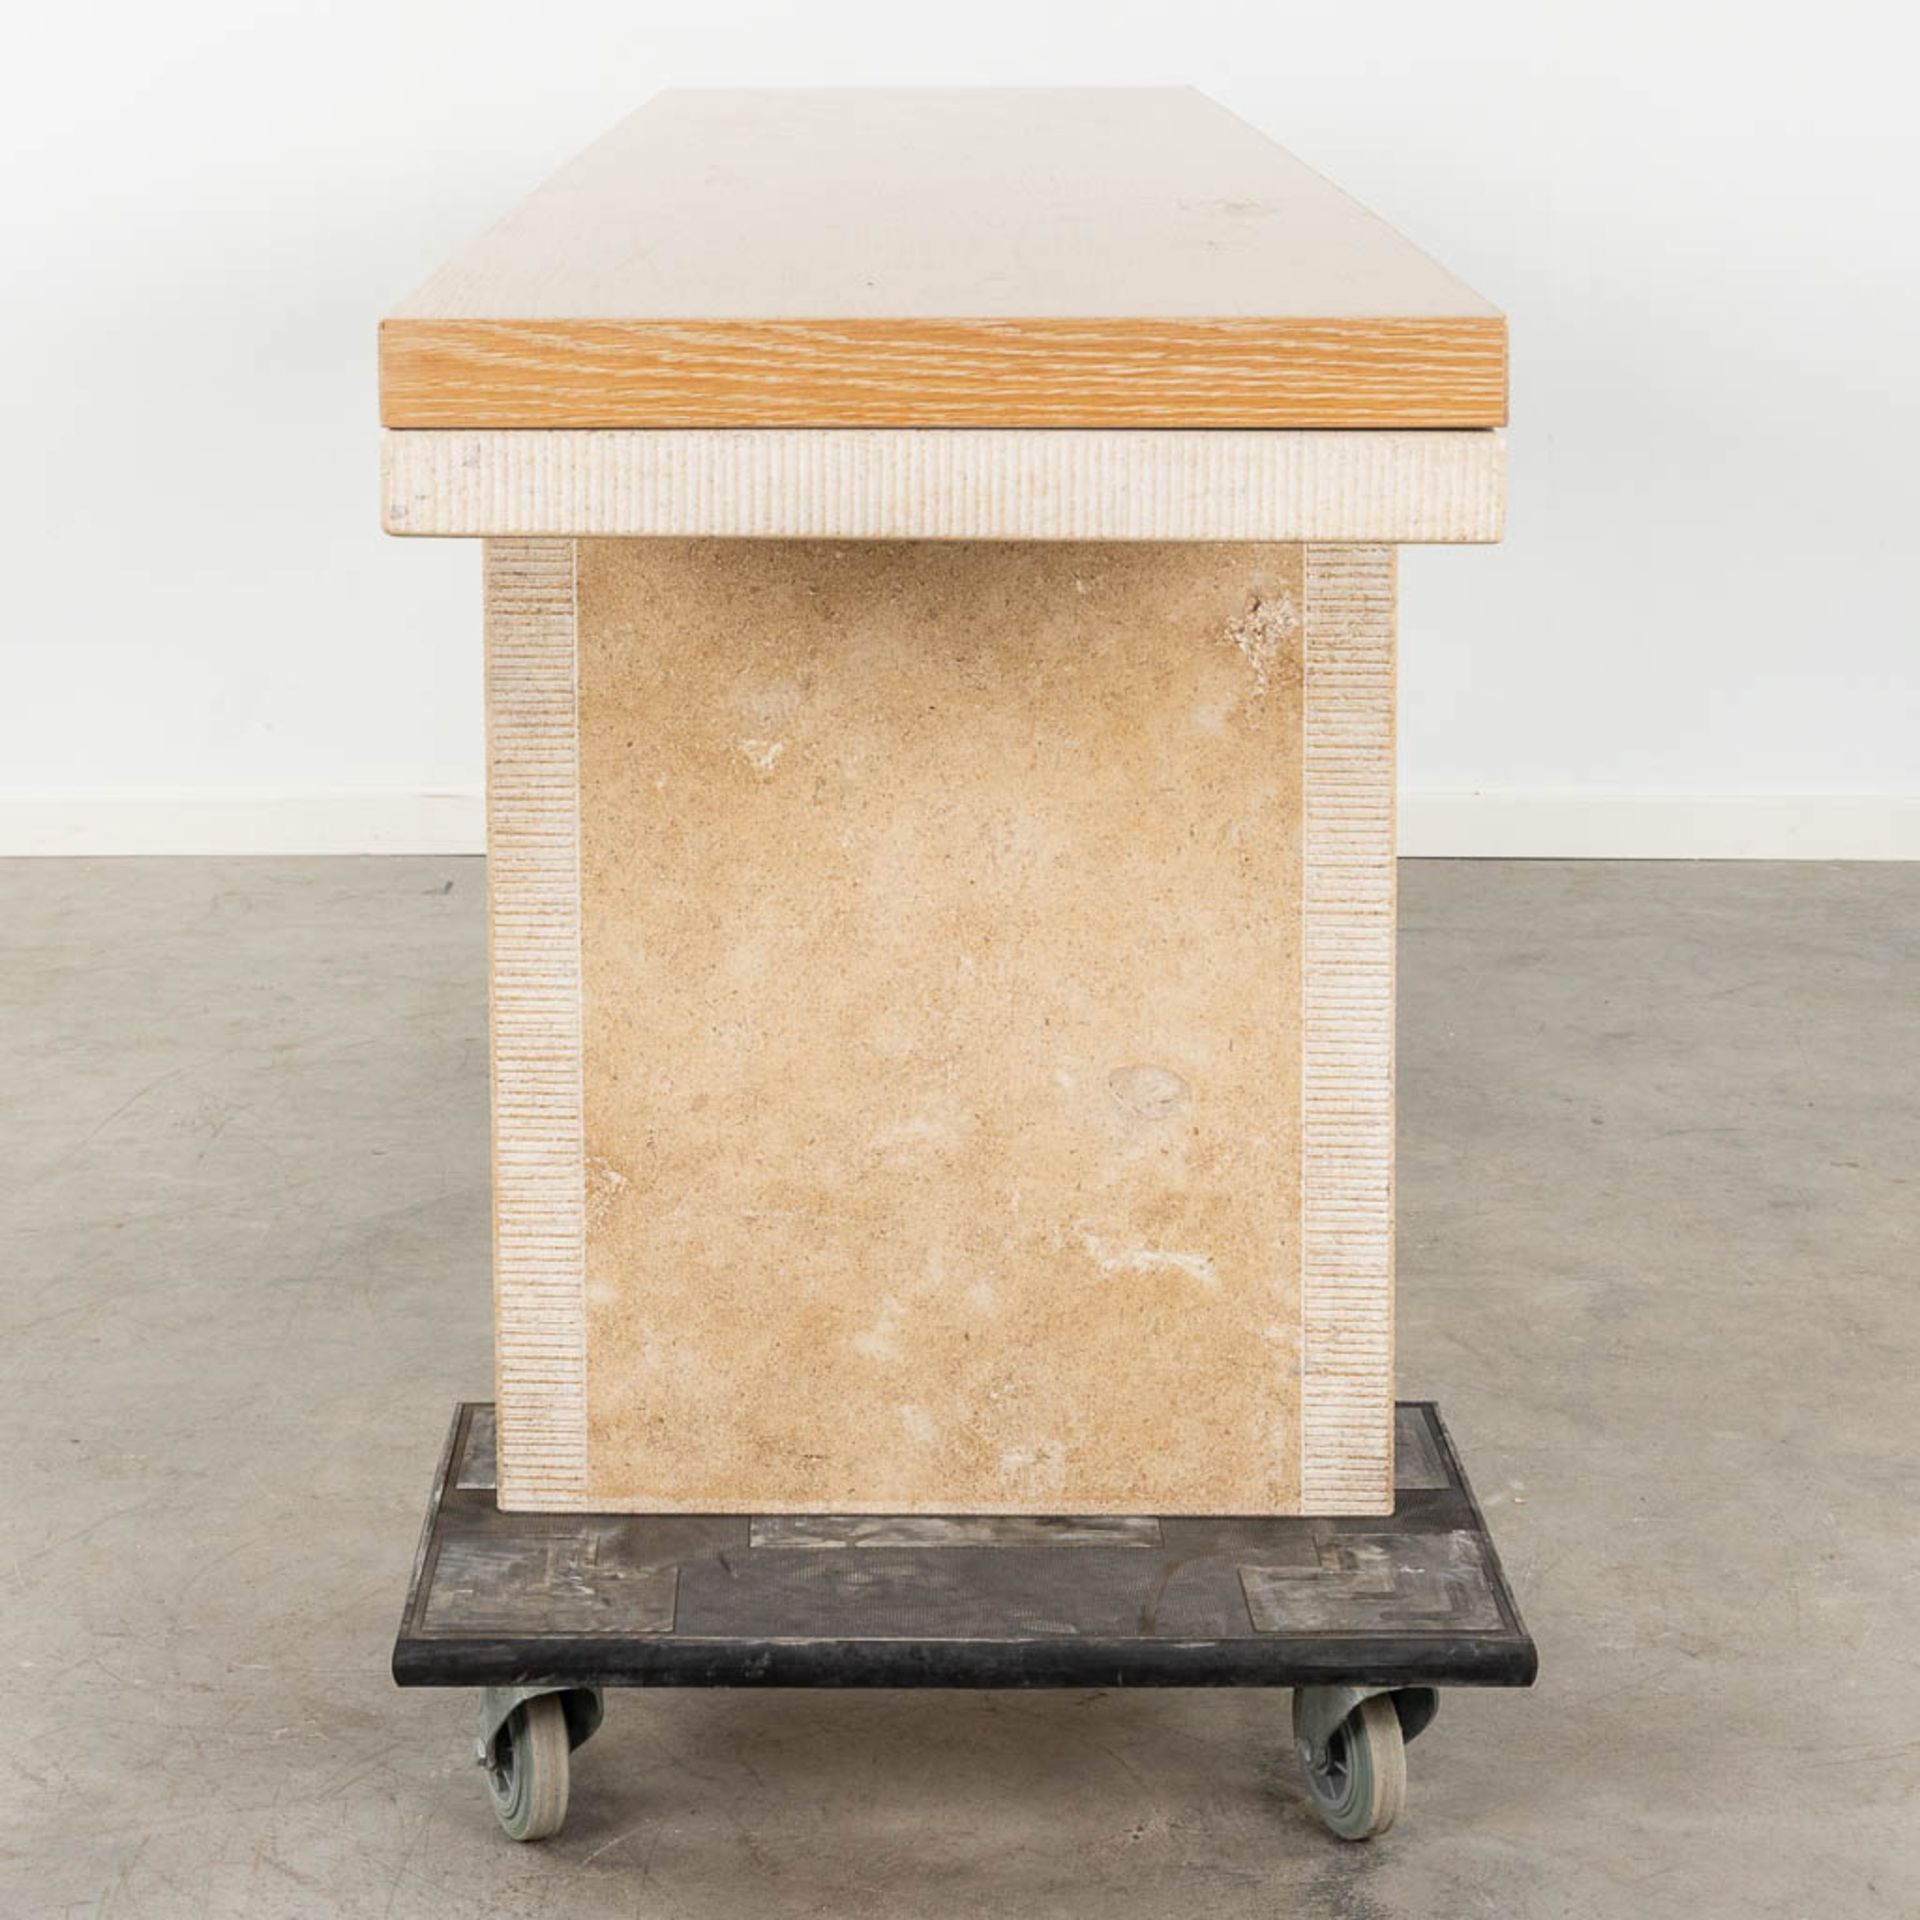 A pair of console tables, travertine with an oak veneered top. 20th C. (D:50 x W:220 x H:73 cm) - Image 9 of 13